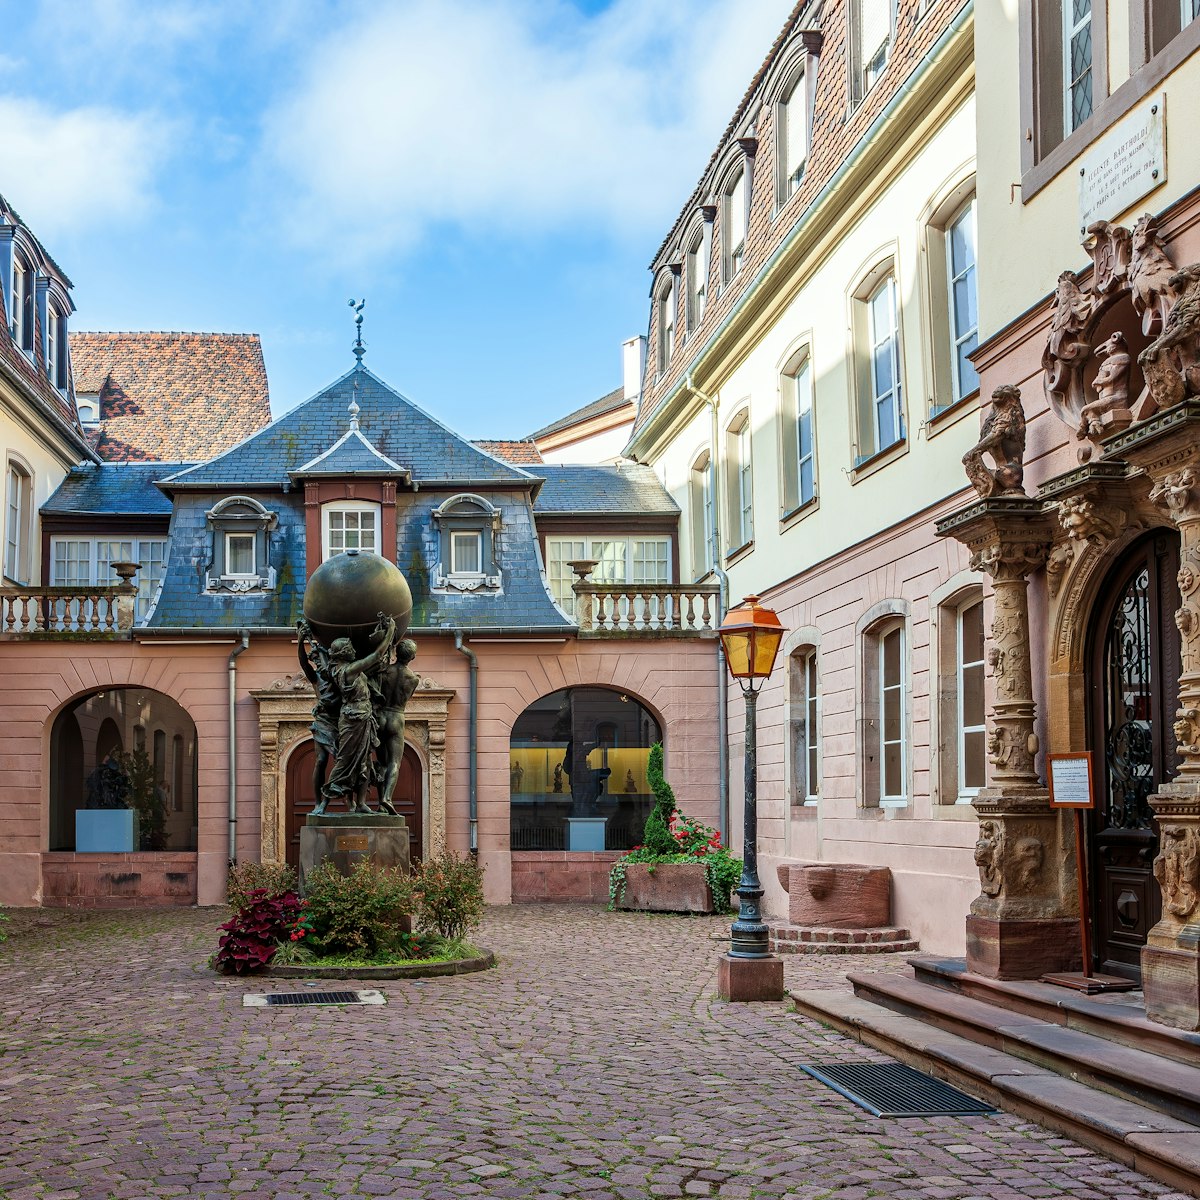 Frederic-Auguste Bartholdi Museum in Colmar, Alsace, France.